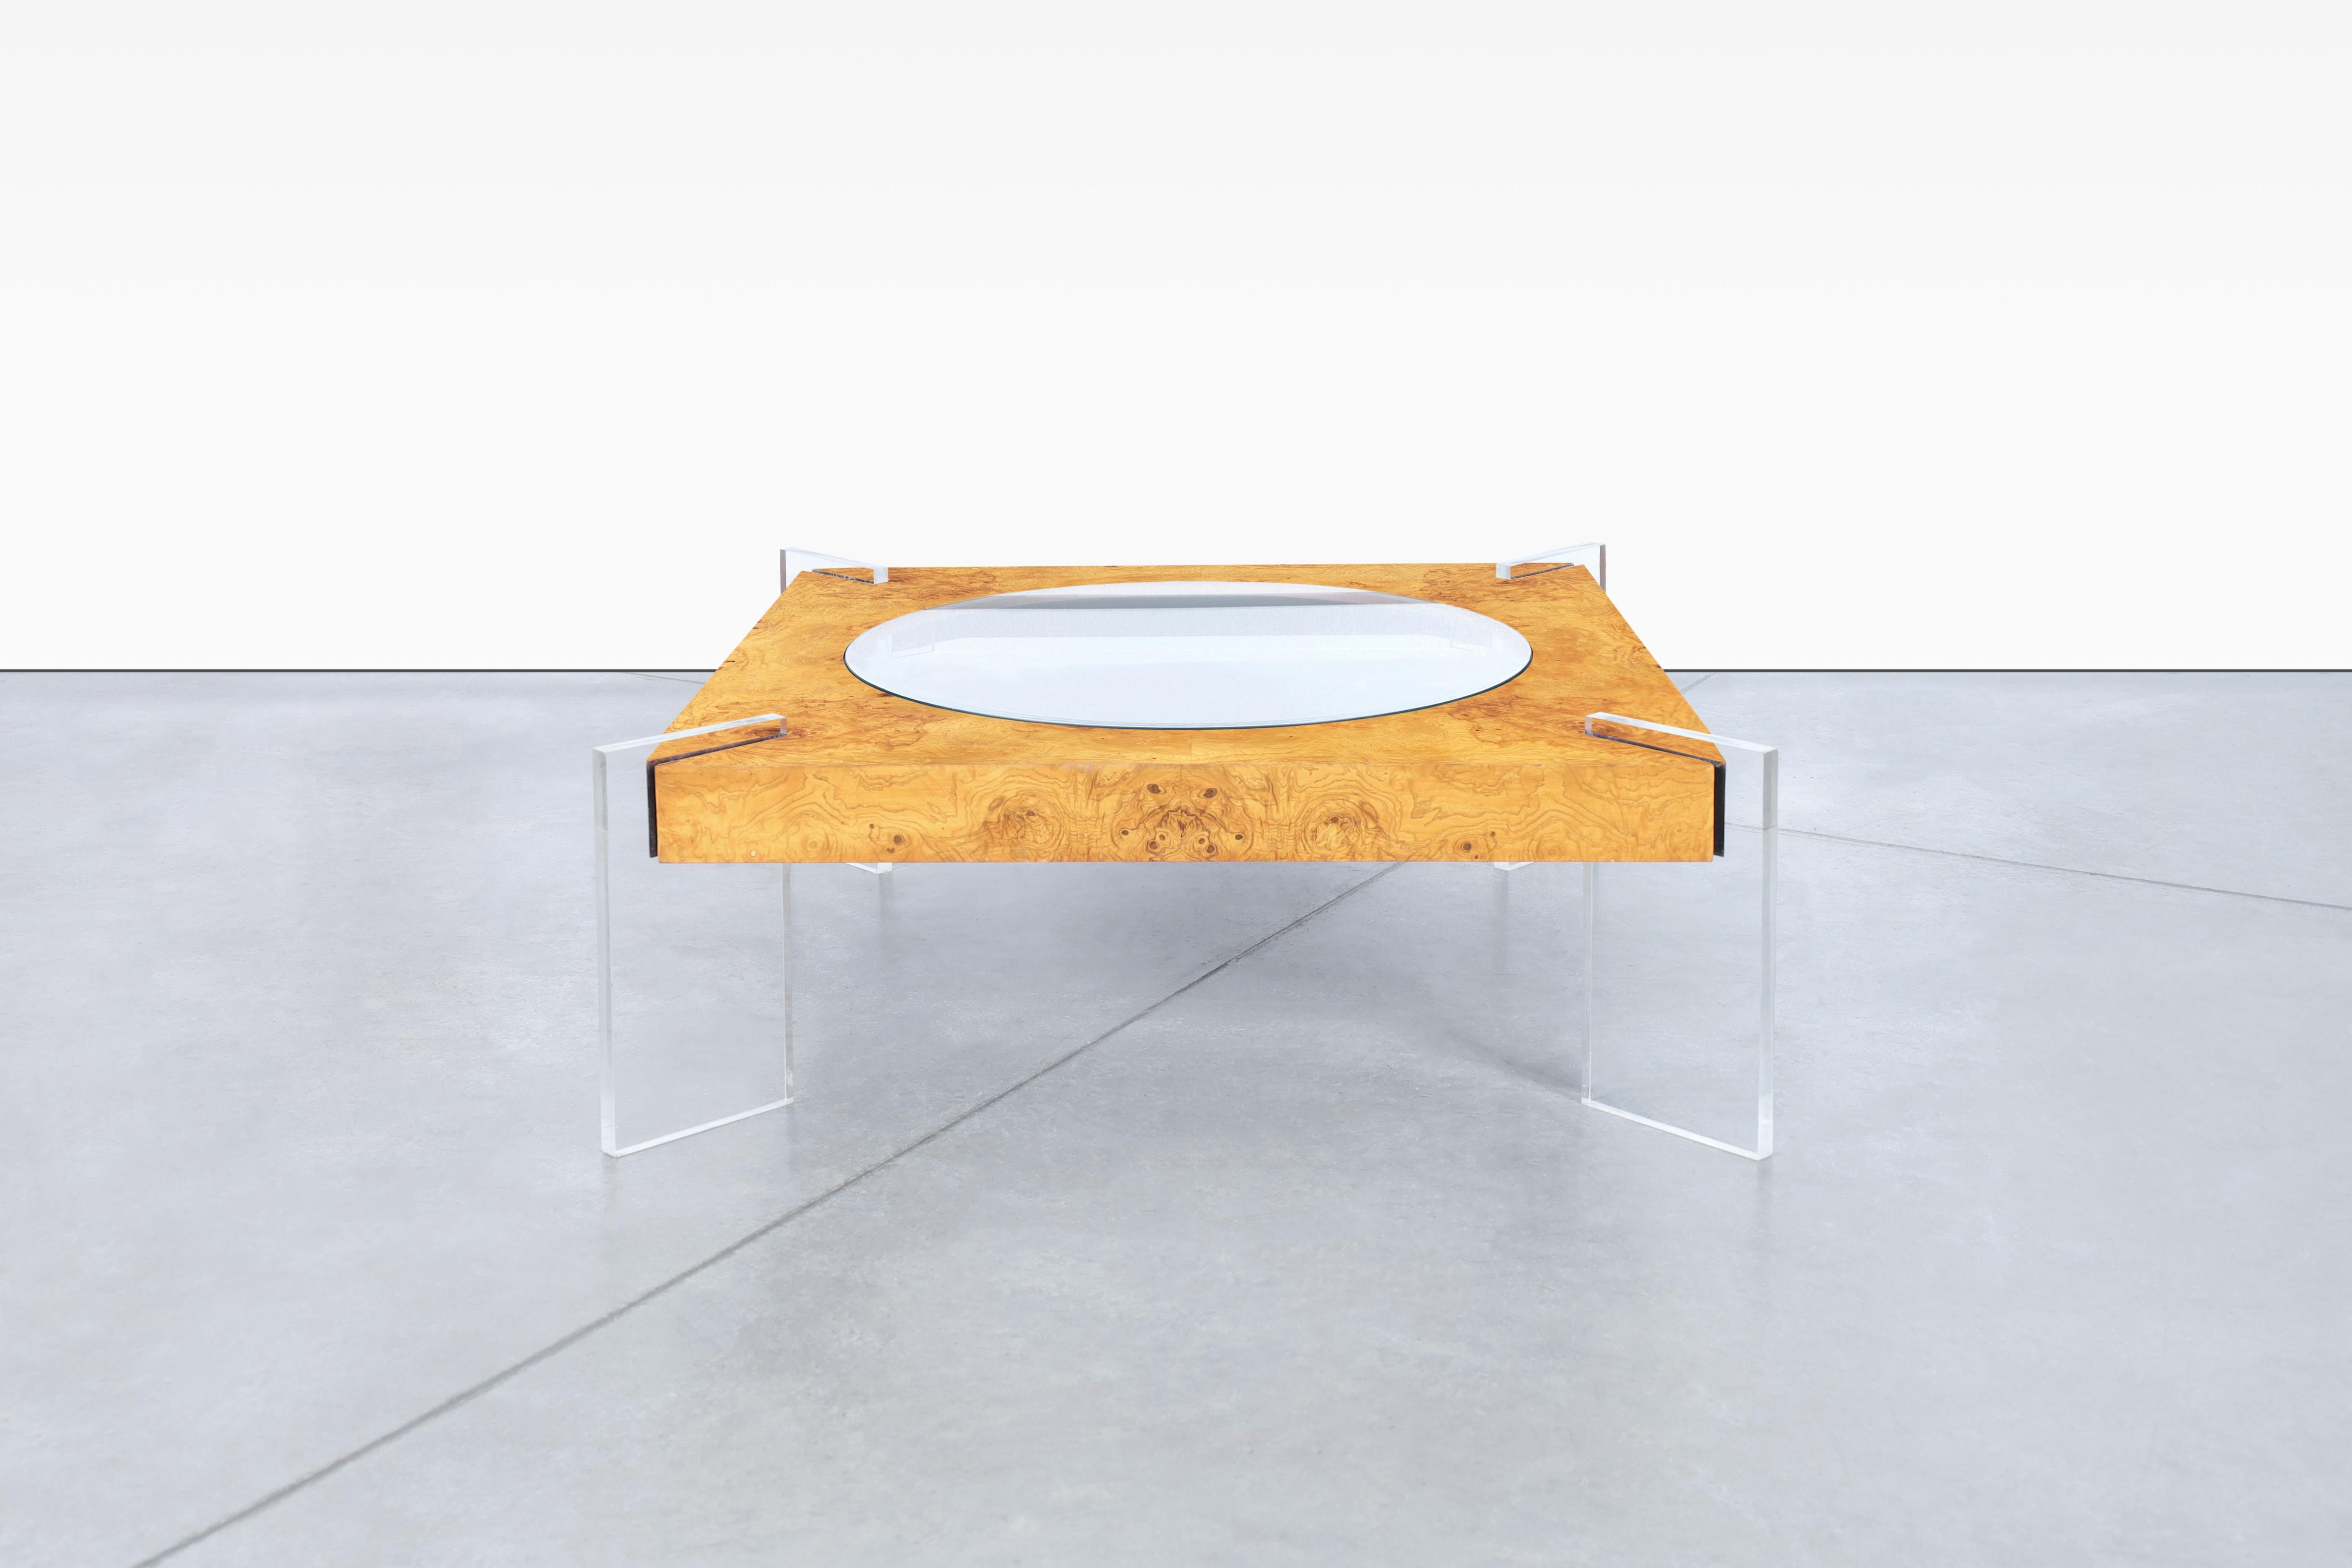 This stunning vintage coffee table by Vladimir Kagan, made in the United States during the 1970s, is a true masterpiece of design. Crafted from burl wood, the frame boasts a beautiful and unique grain pattern that is sure to catch the eye. The